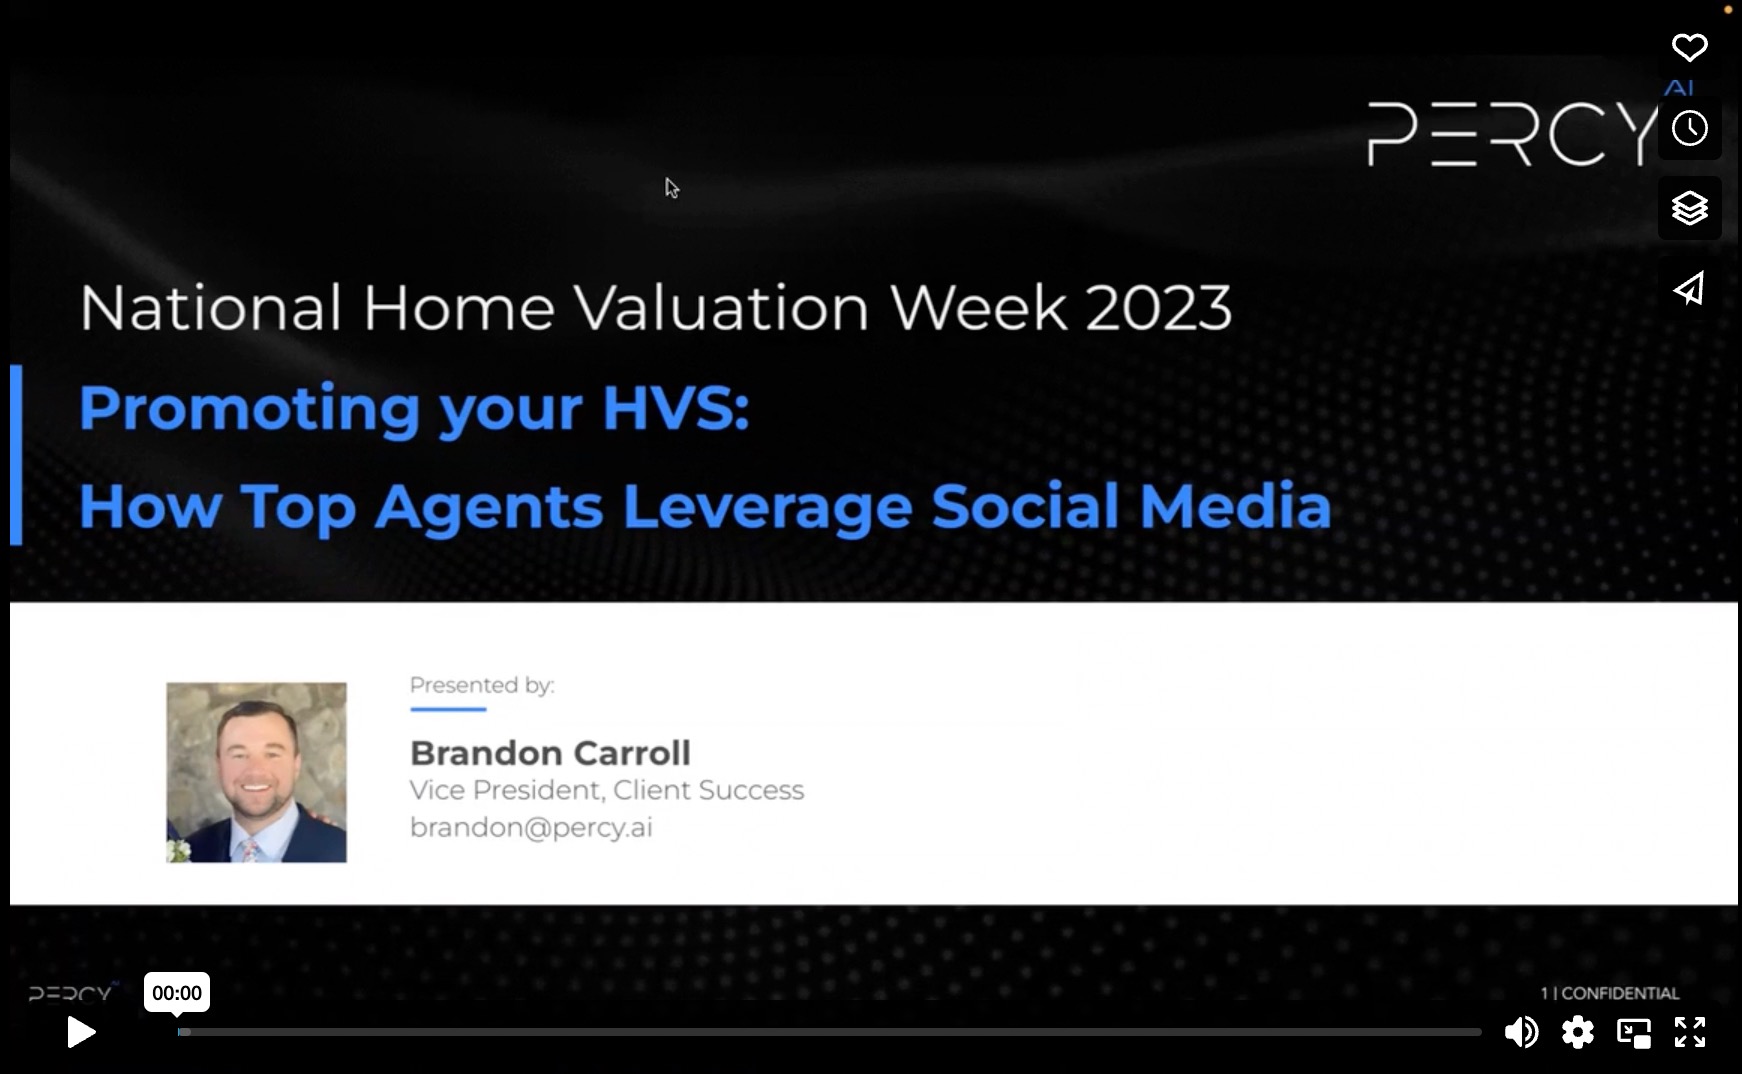 Promoting_your_HVS_-_How_Top_Agents_Leverage_Social_Media_on_Vimeo_2023-04-06_at_10.32.21_AM.jpg